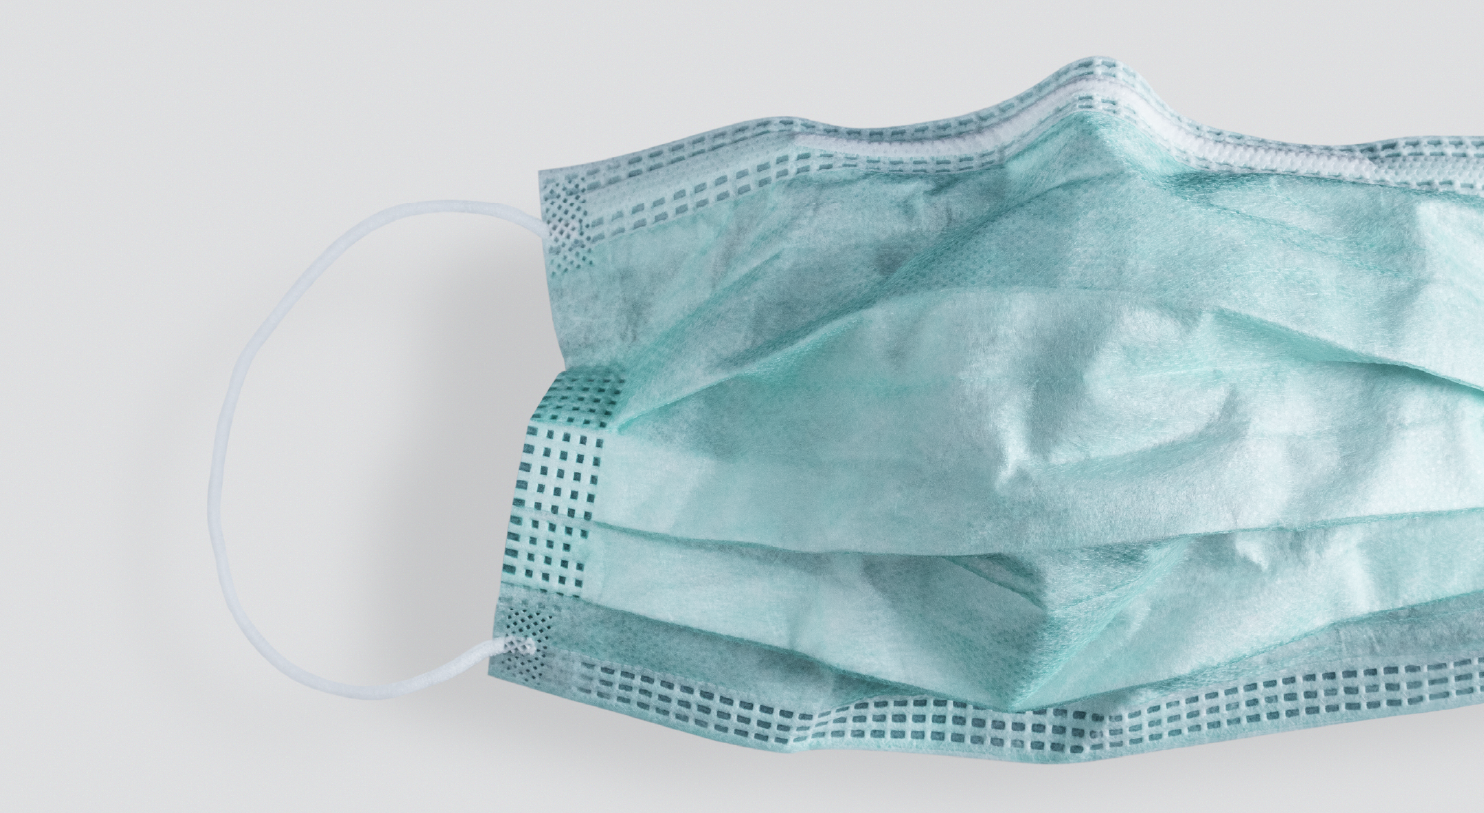 Advice for general practices regarding Softmed surgical masks